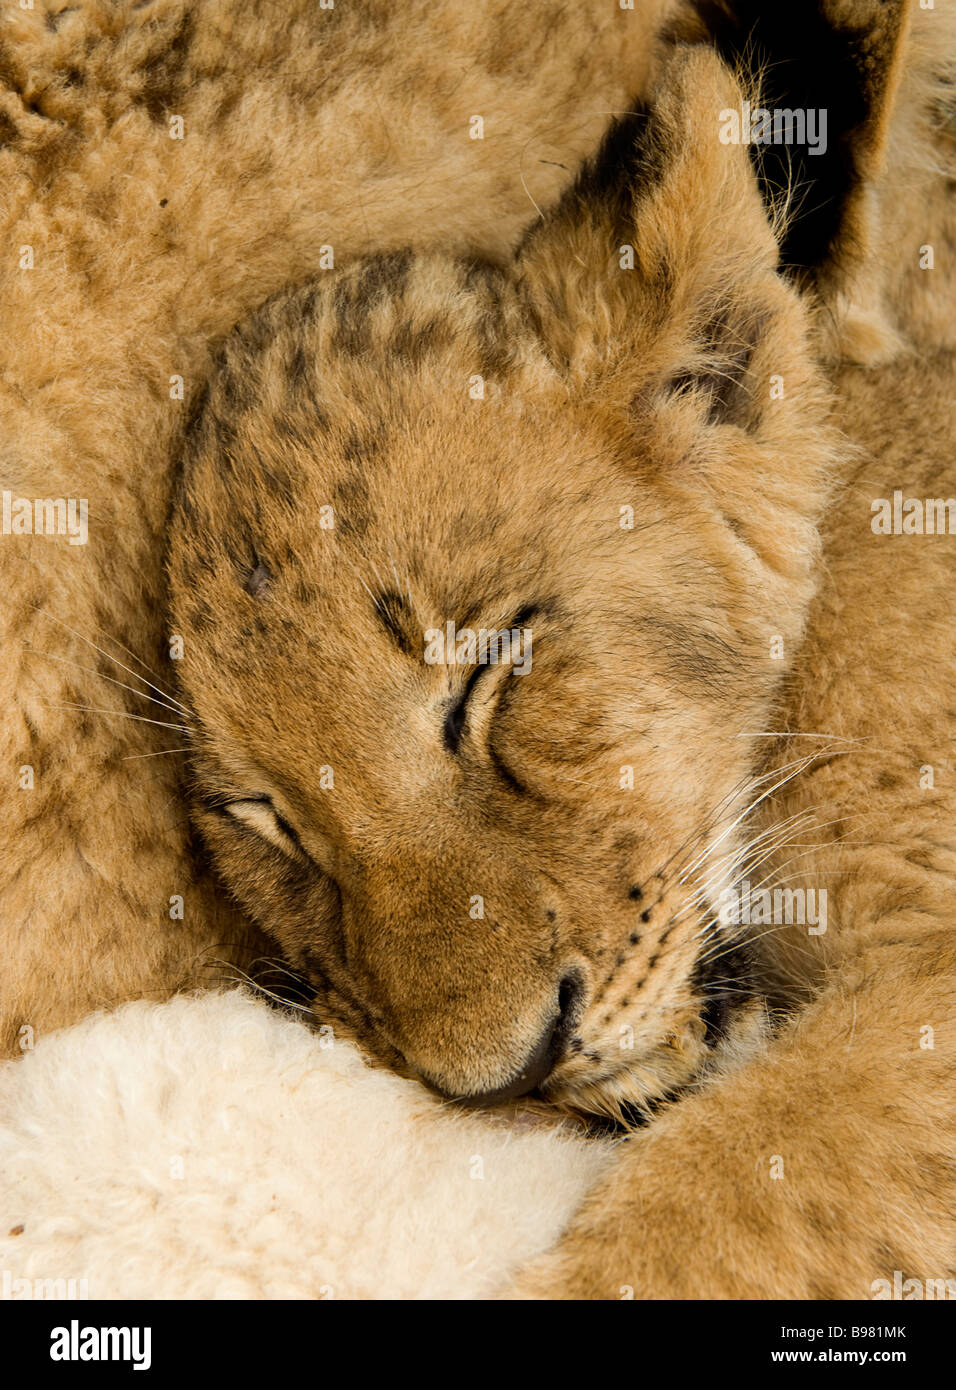 A baby lion cub sleeping in captivity cuddled with other cubs in South Africa Stock Photo